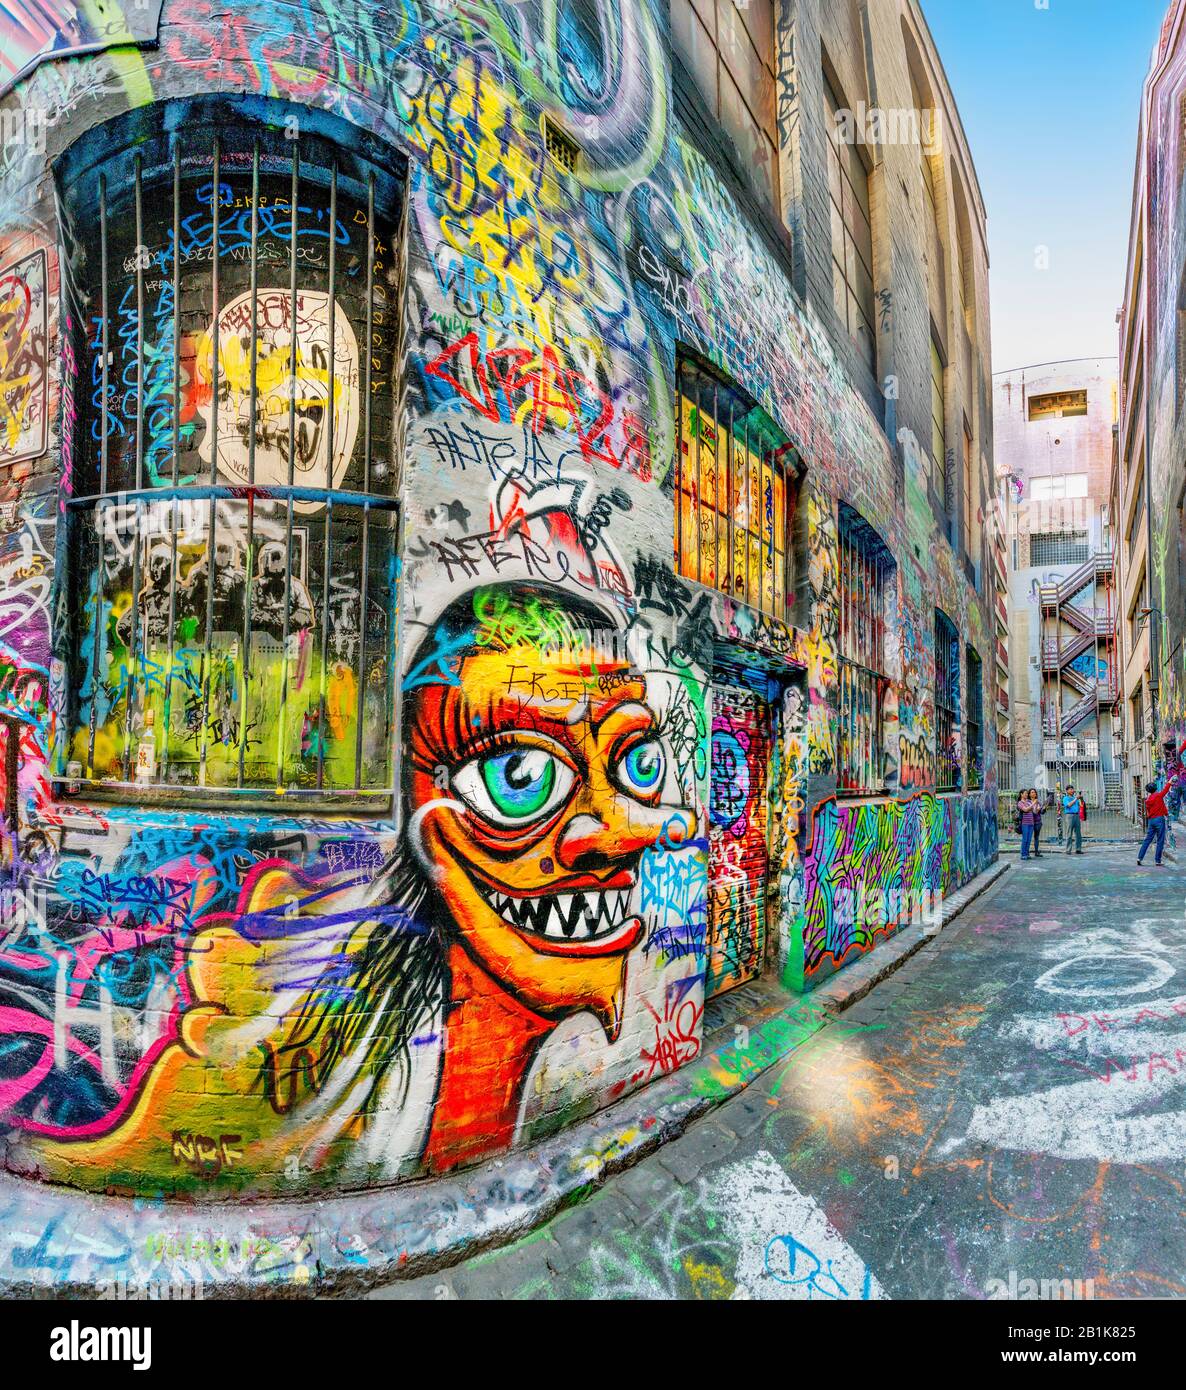 Funny face graffiti painted on brick wall down an alley full of colourful graffiti, Hosier Street, Melbourne Lanes, Melbourne, Victoria, Australia Stock Photo